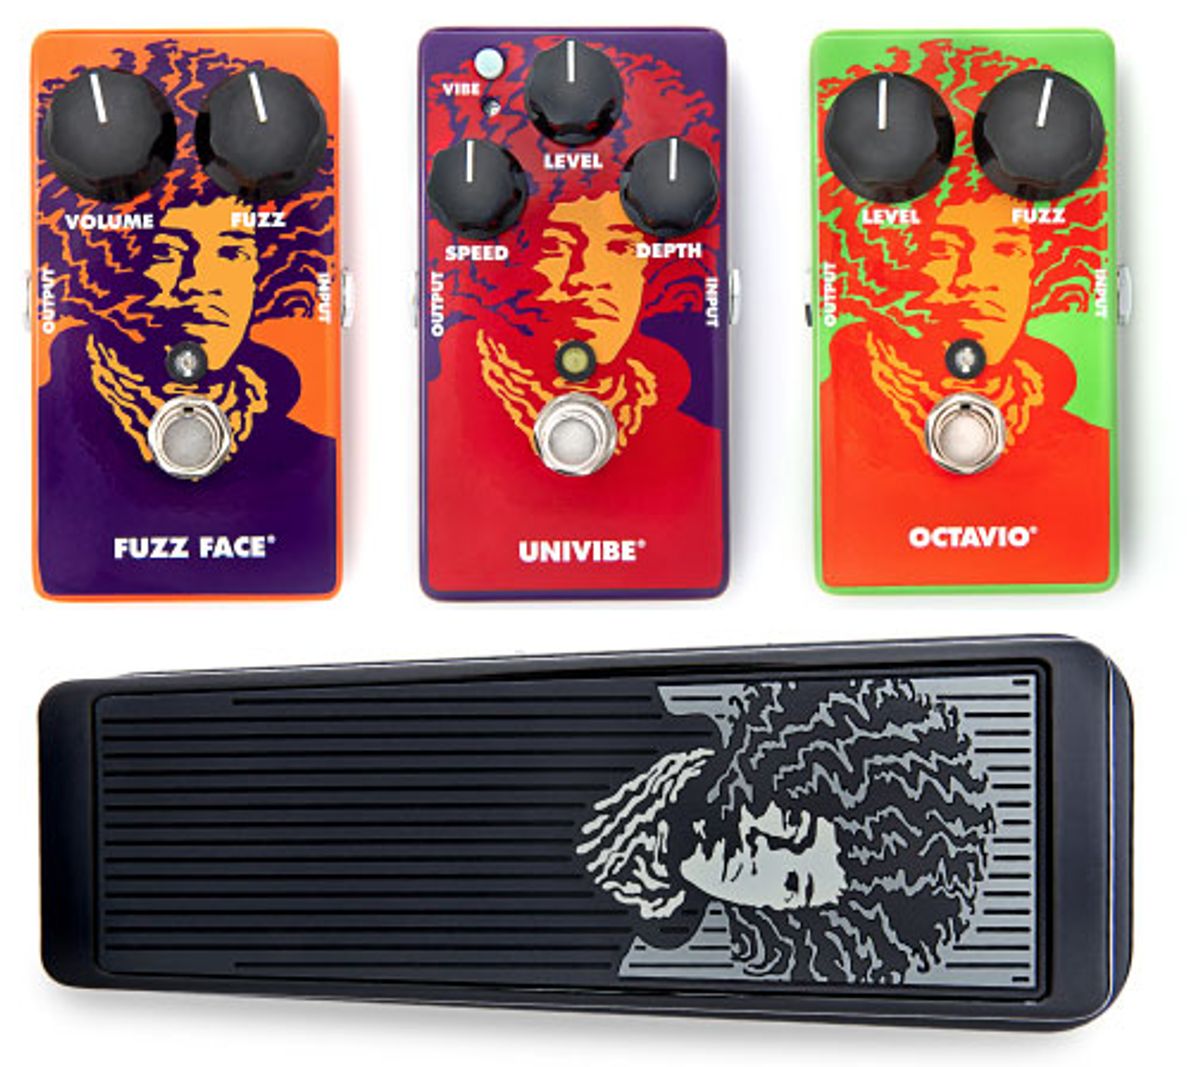 Dunlop Introduces Hendrix Limited Edition Cry Baby, Fuzz Face, Univibe, and Octavio Pedals